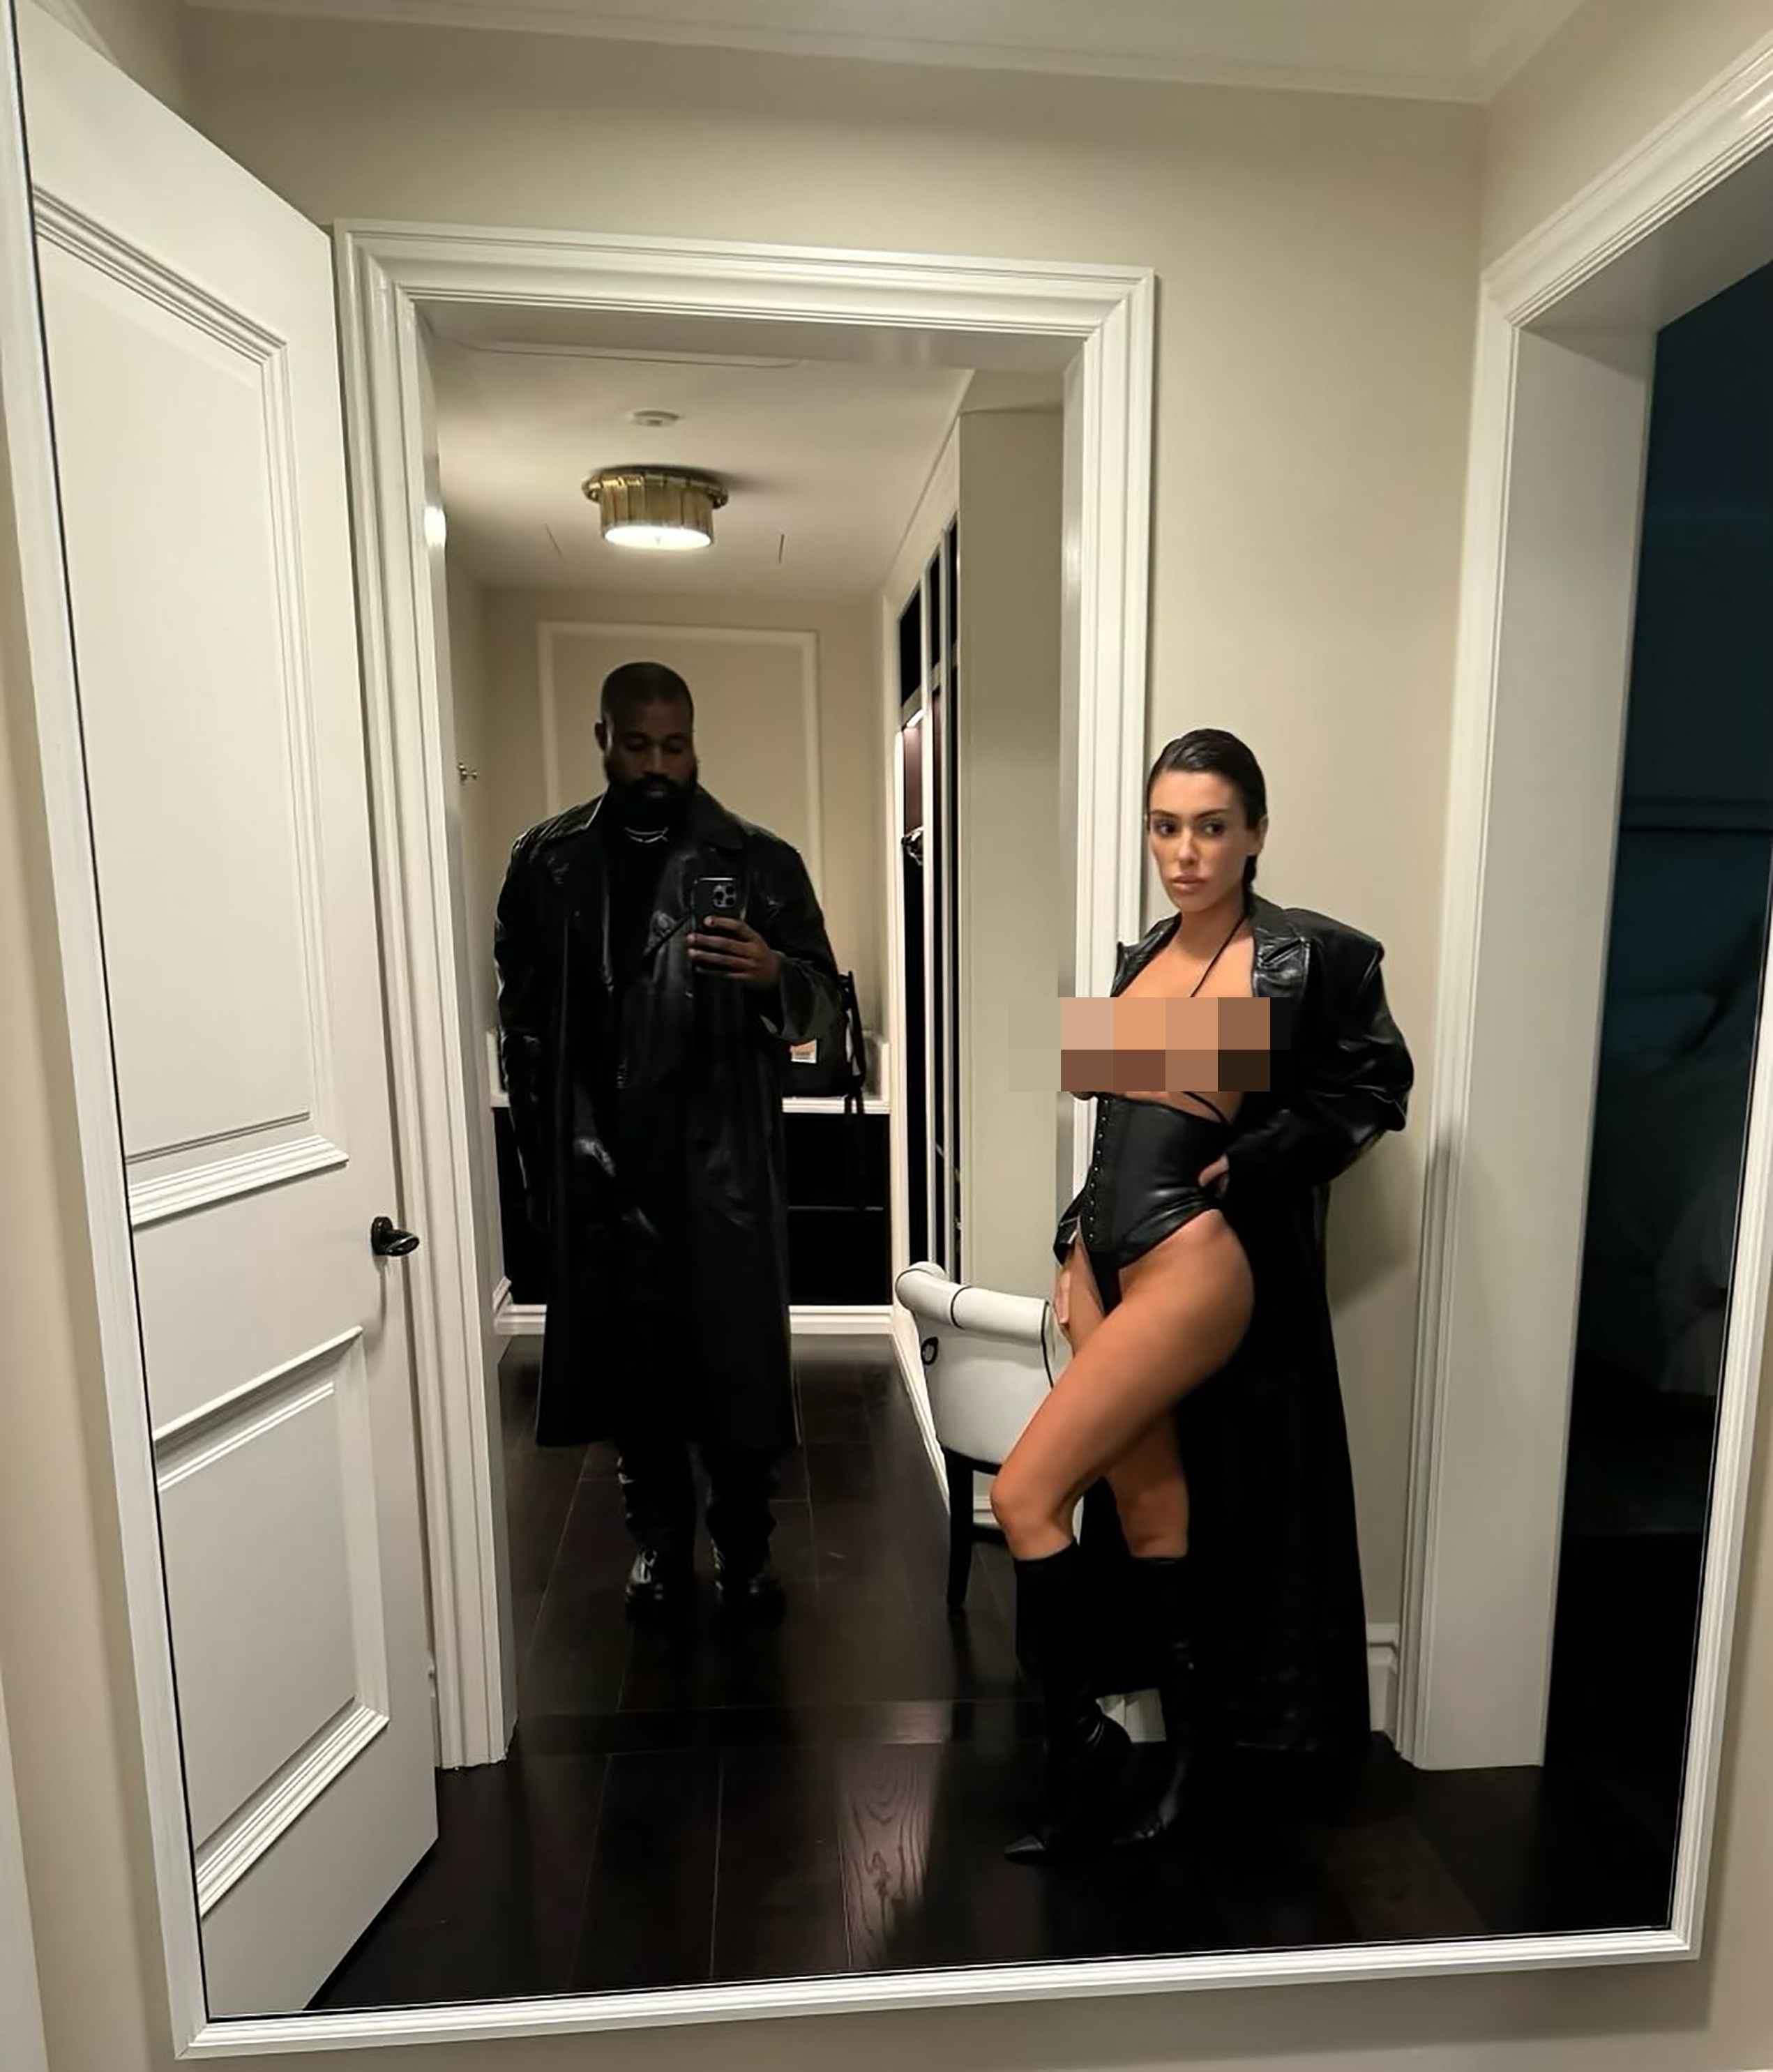 Kanye loves to post photos of his wife in shocking, barely-there outfits on Instagram